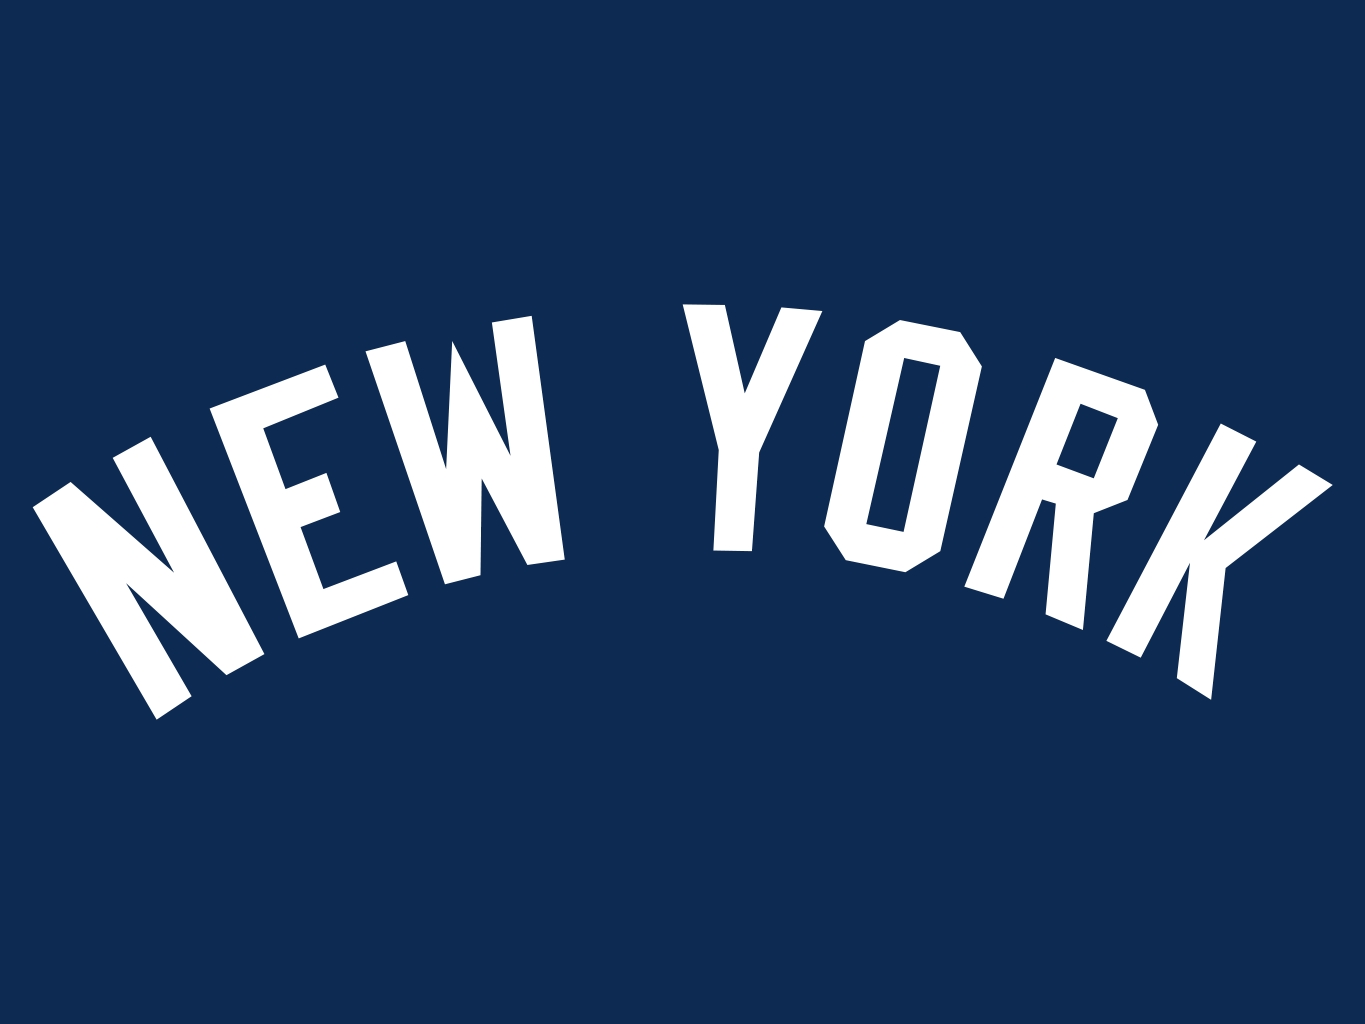 🔥 Free download If you are looking for New York Yankees images today is